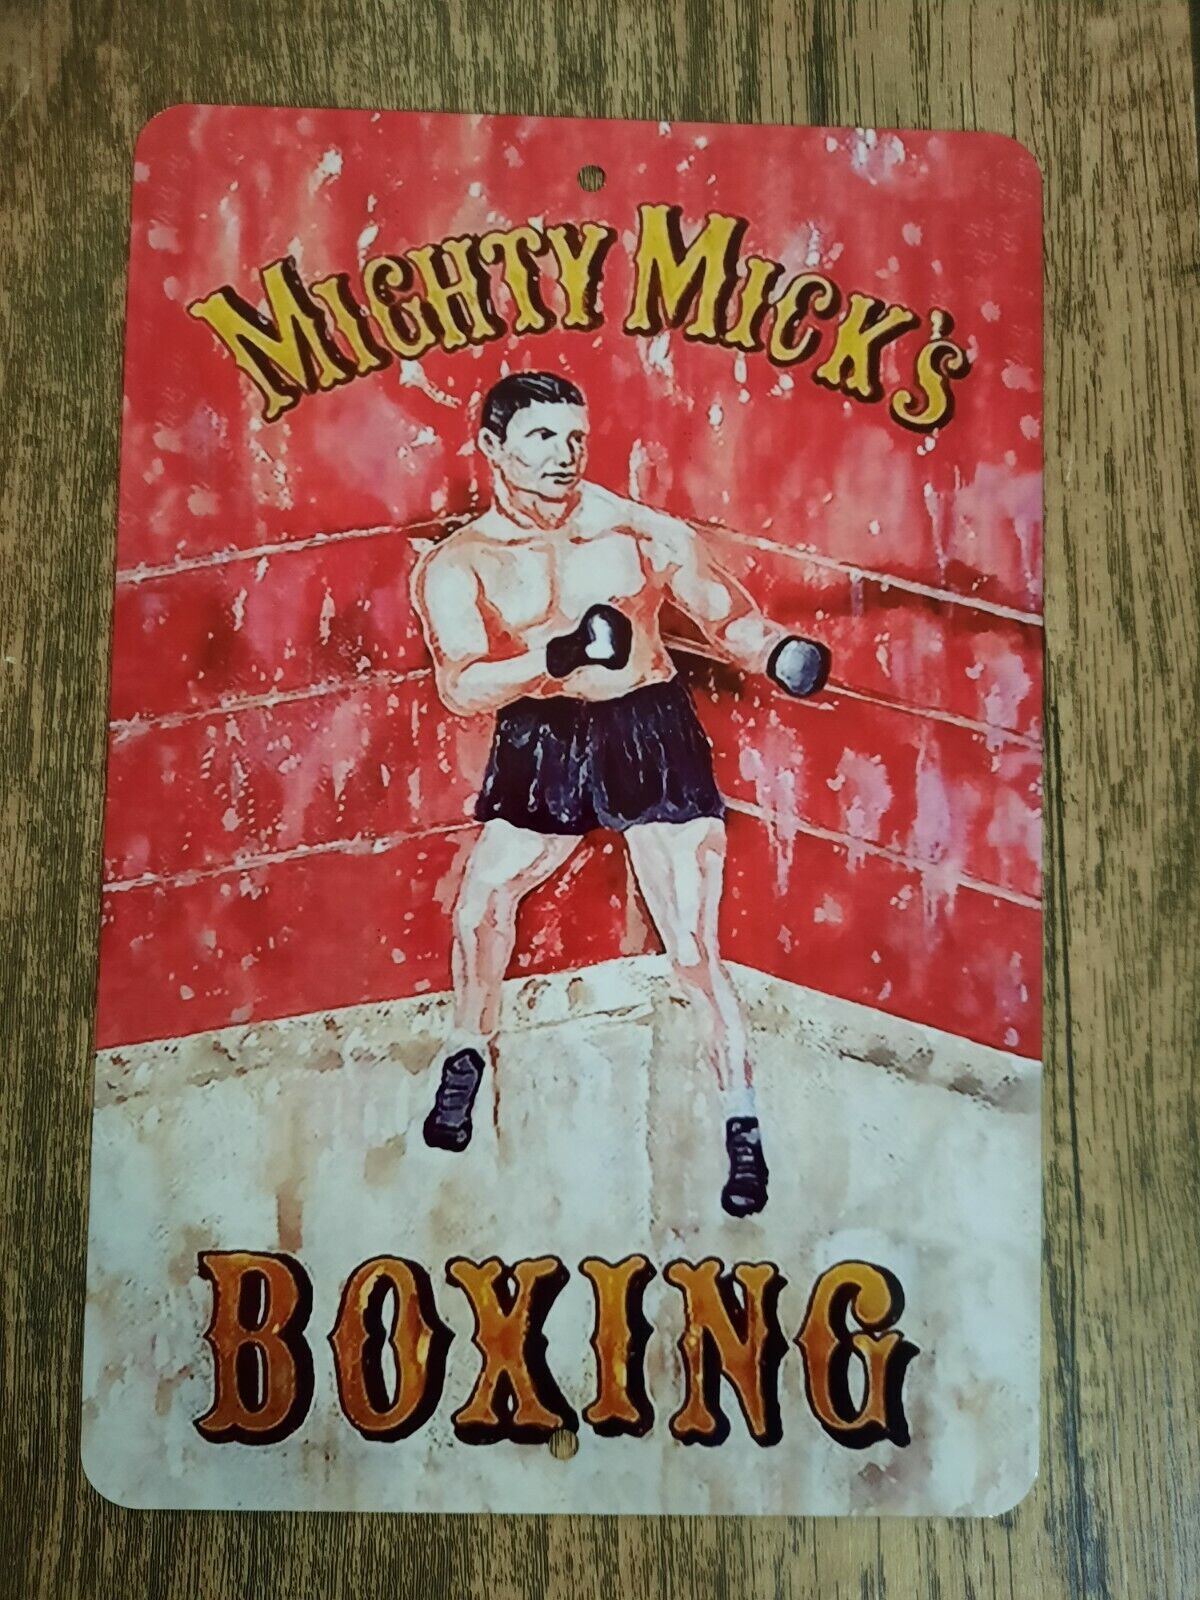 Mighty Micks Boxing 8x12 Metal Wall Sign Garage Man Cave Rocky